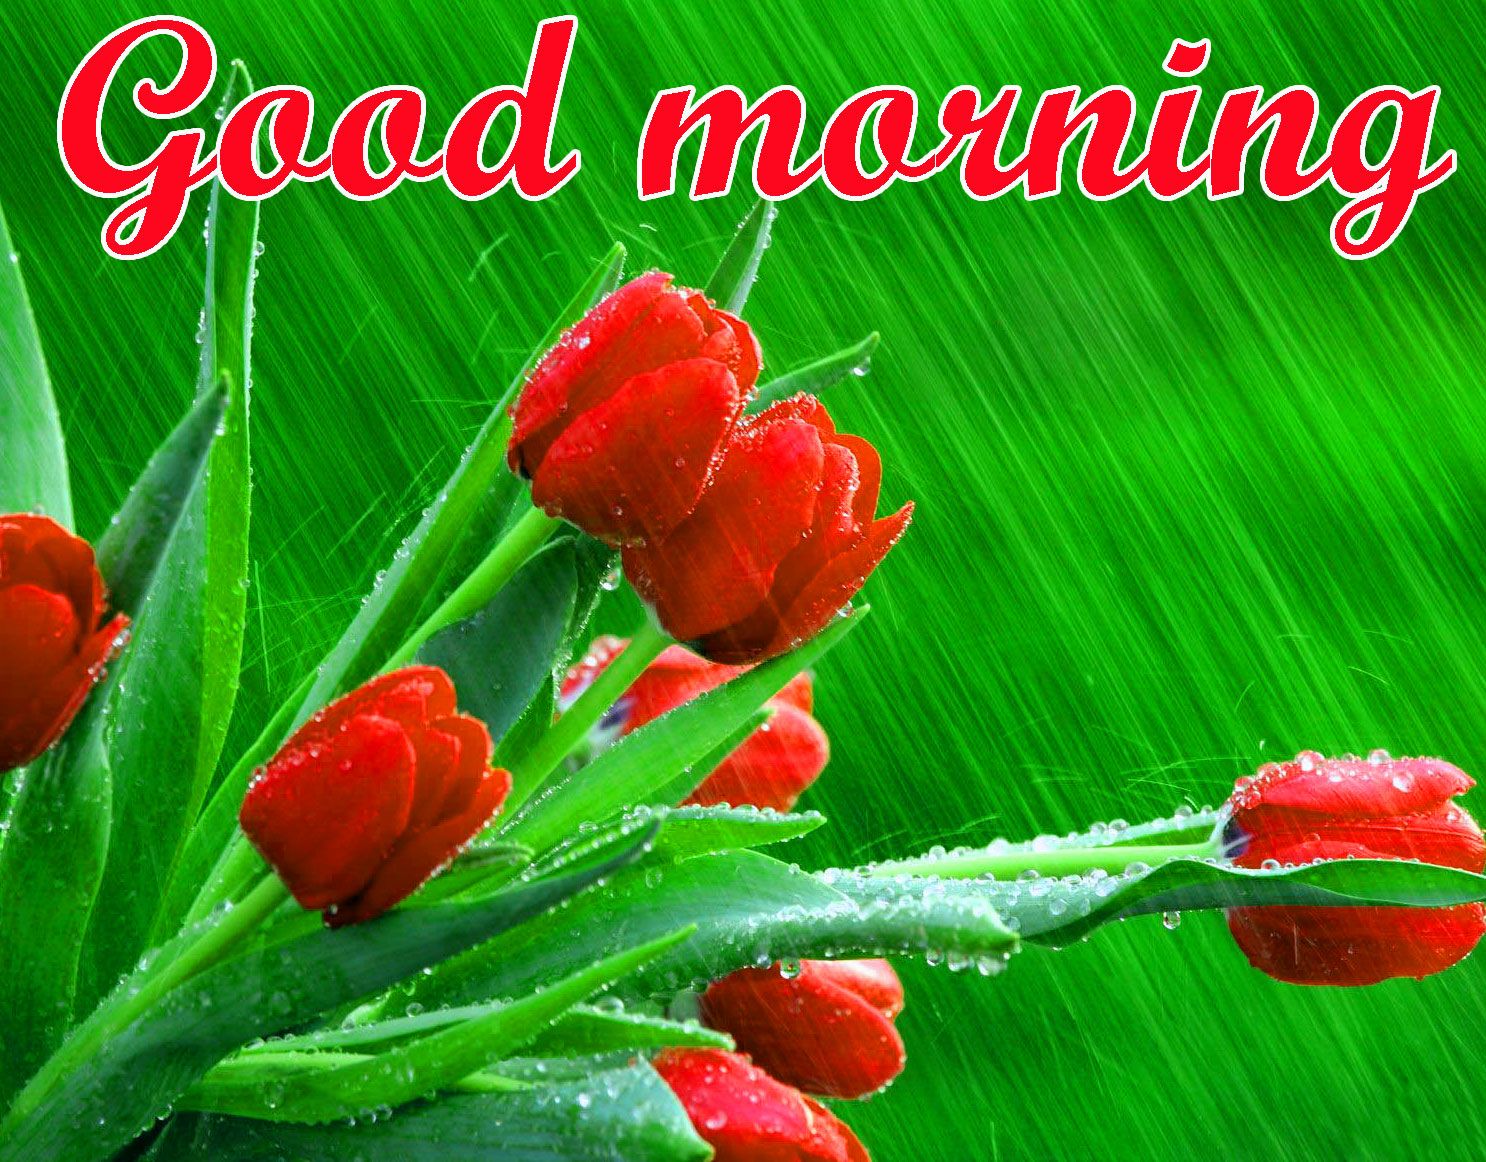 Good Morning 3D Images Wallpapers